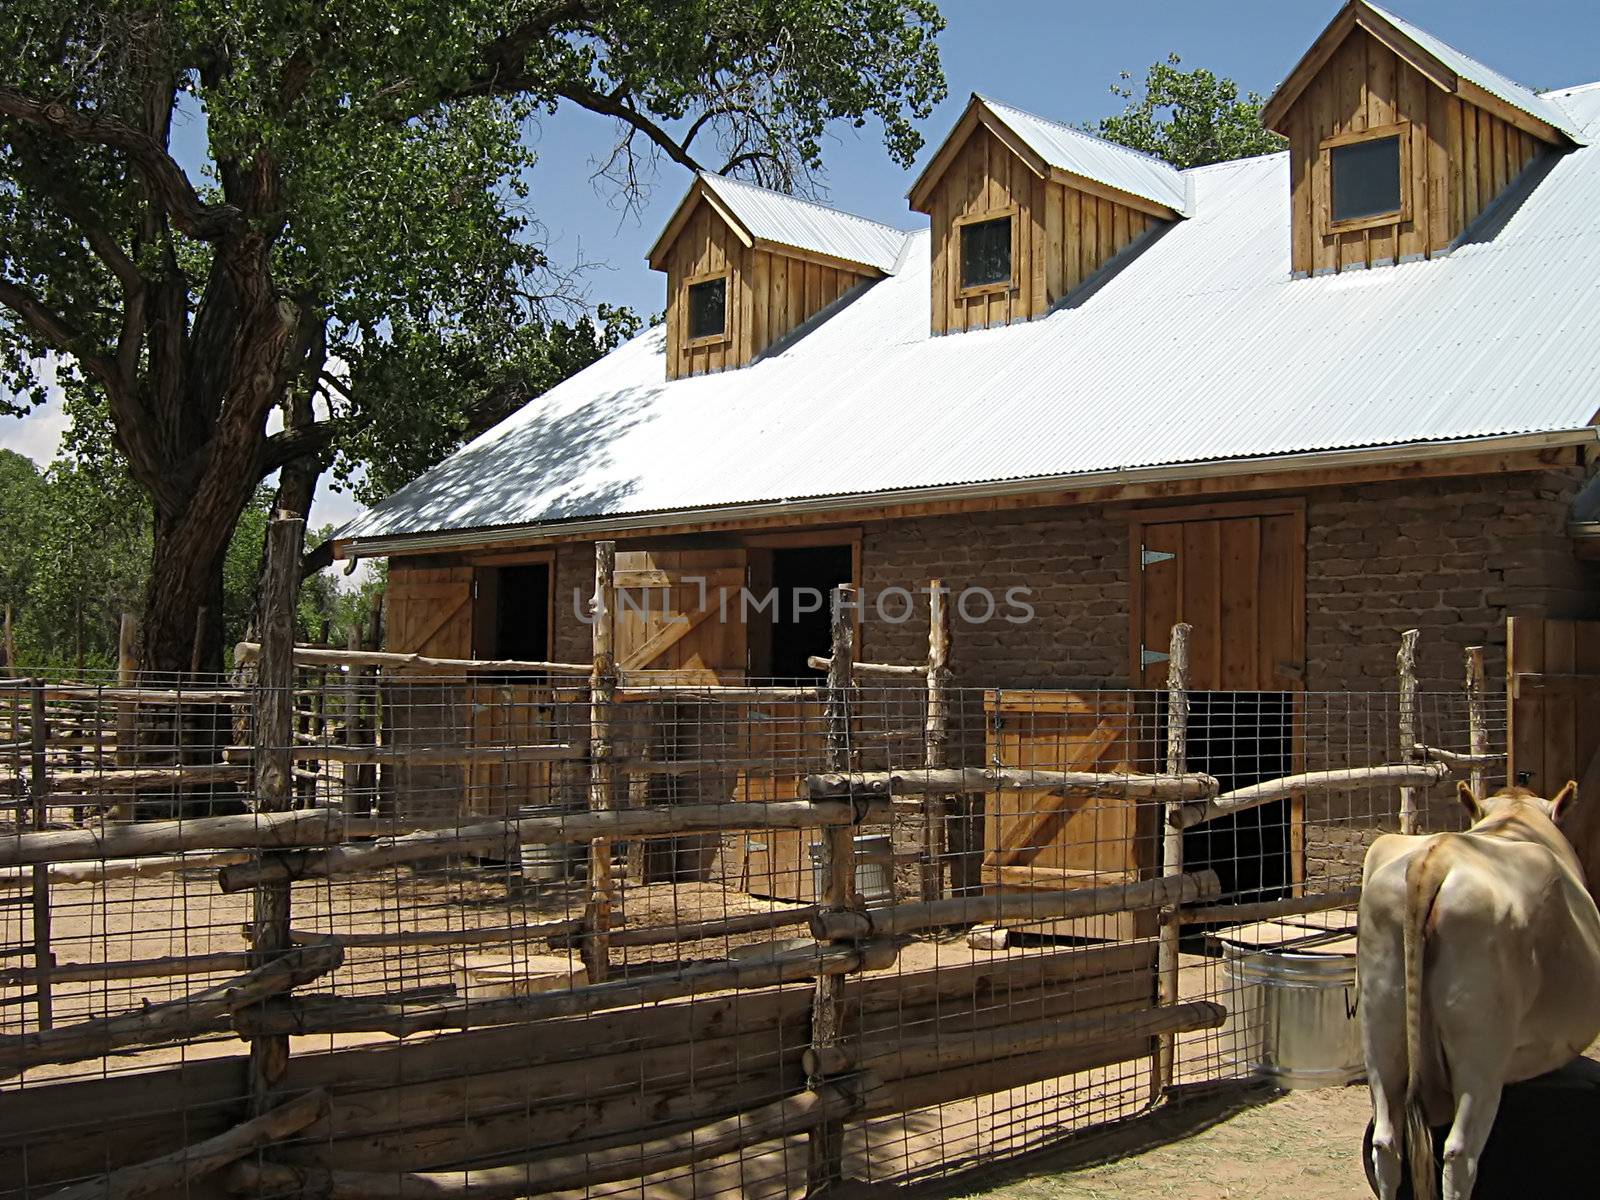 A photograph of a barn detailing its architecture.